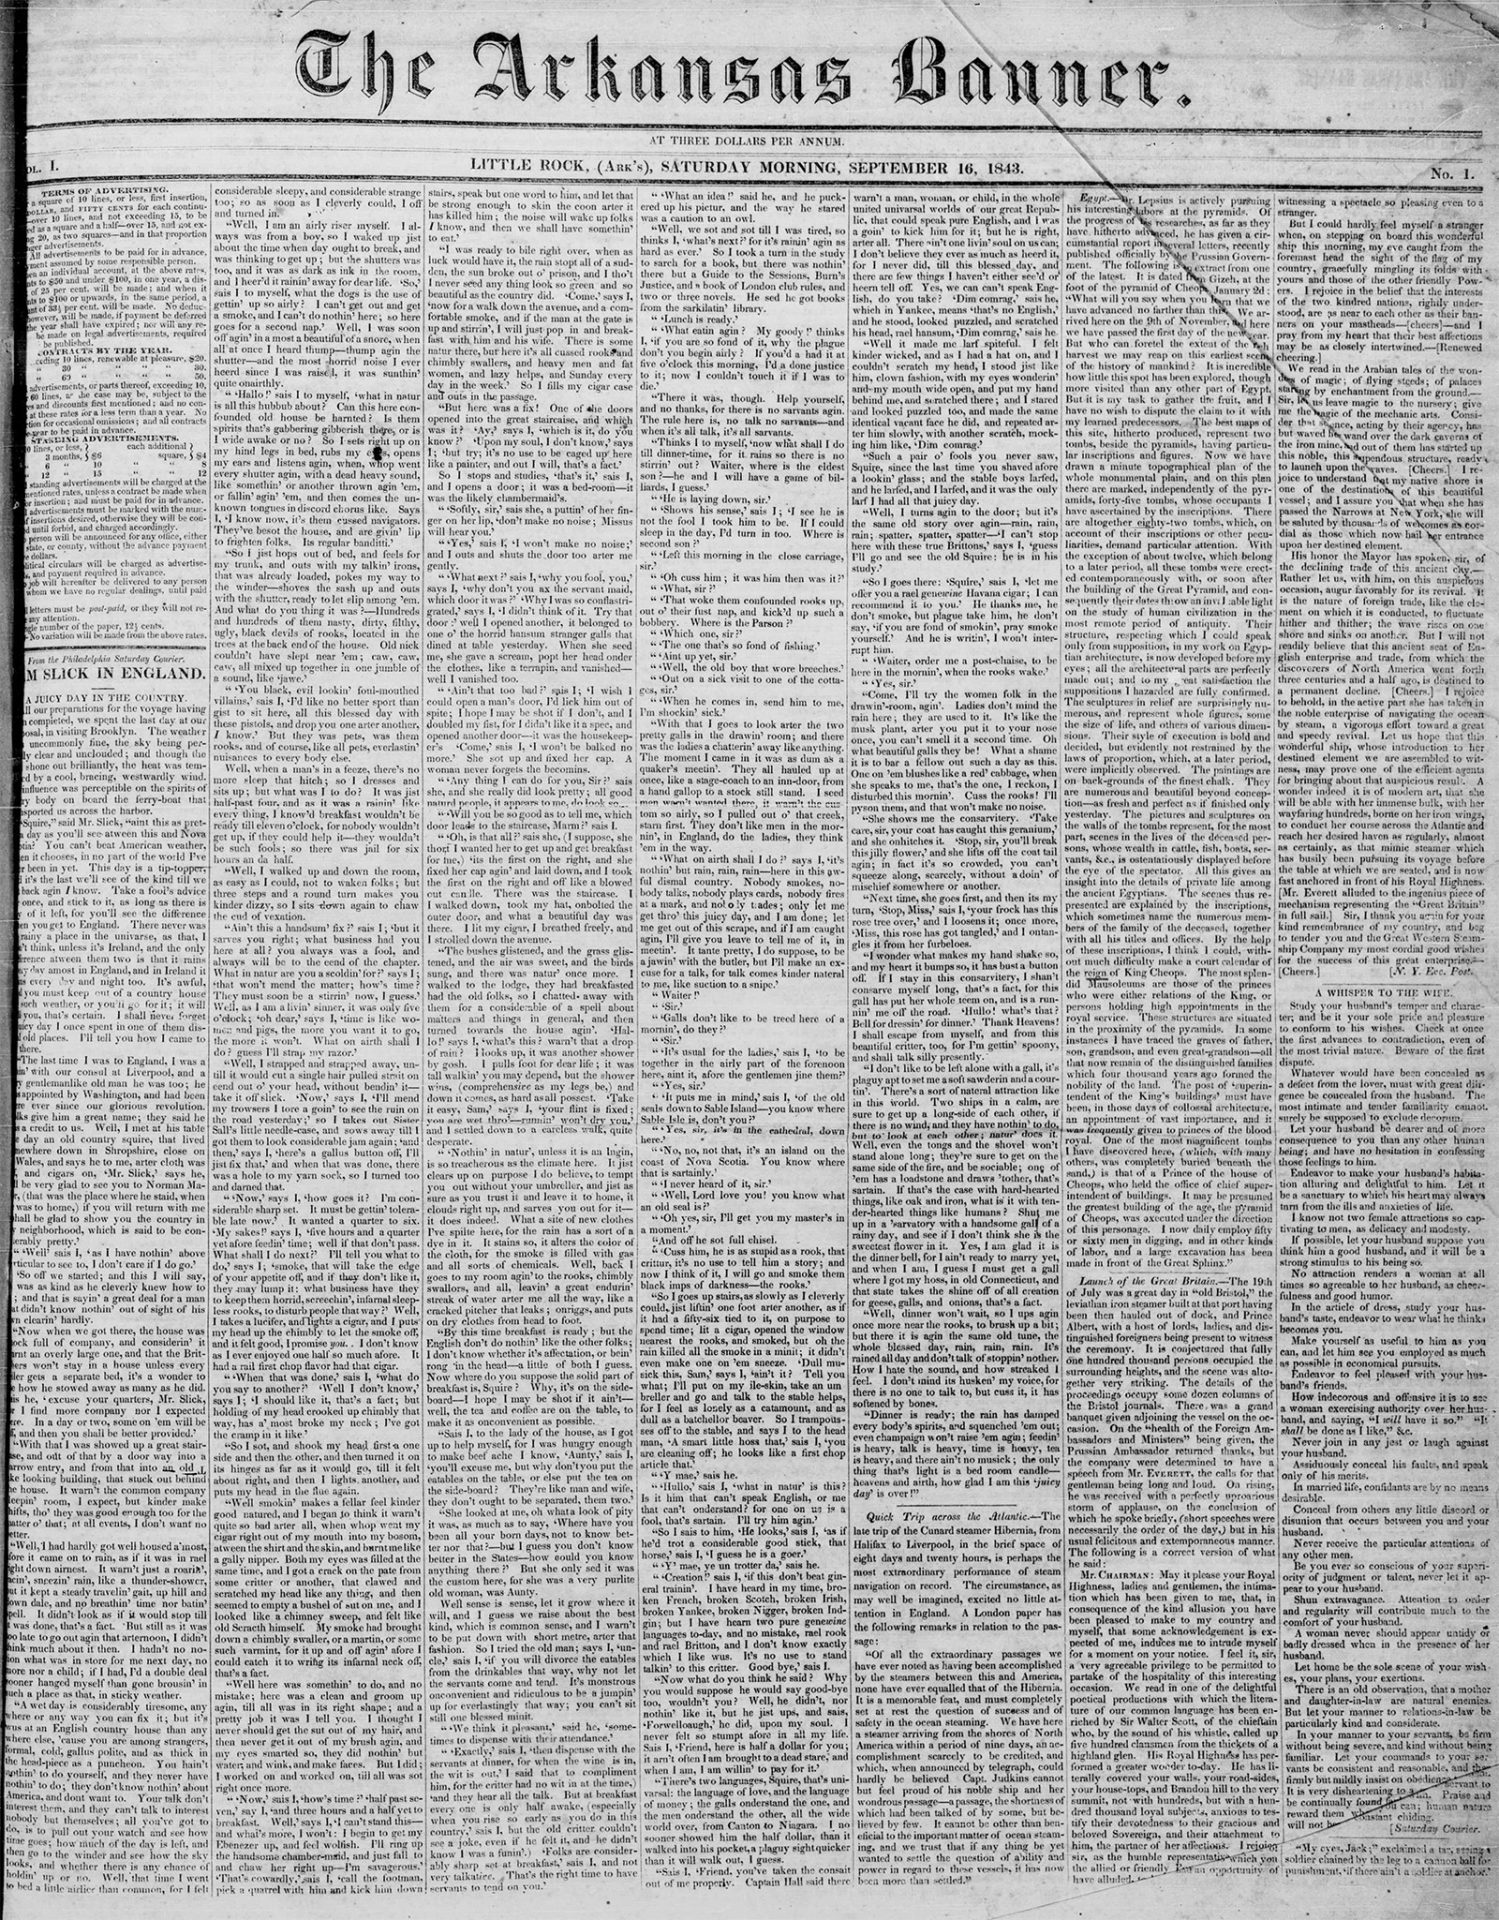 Newspaper front page "Arkansas Banner"